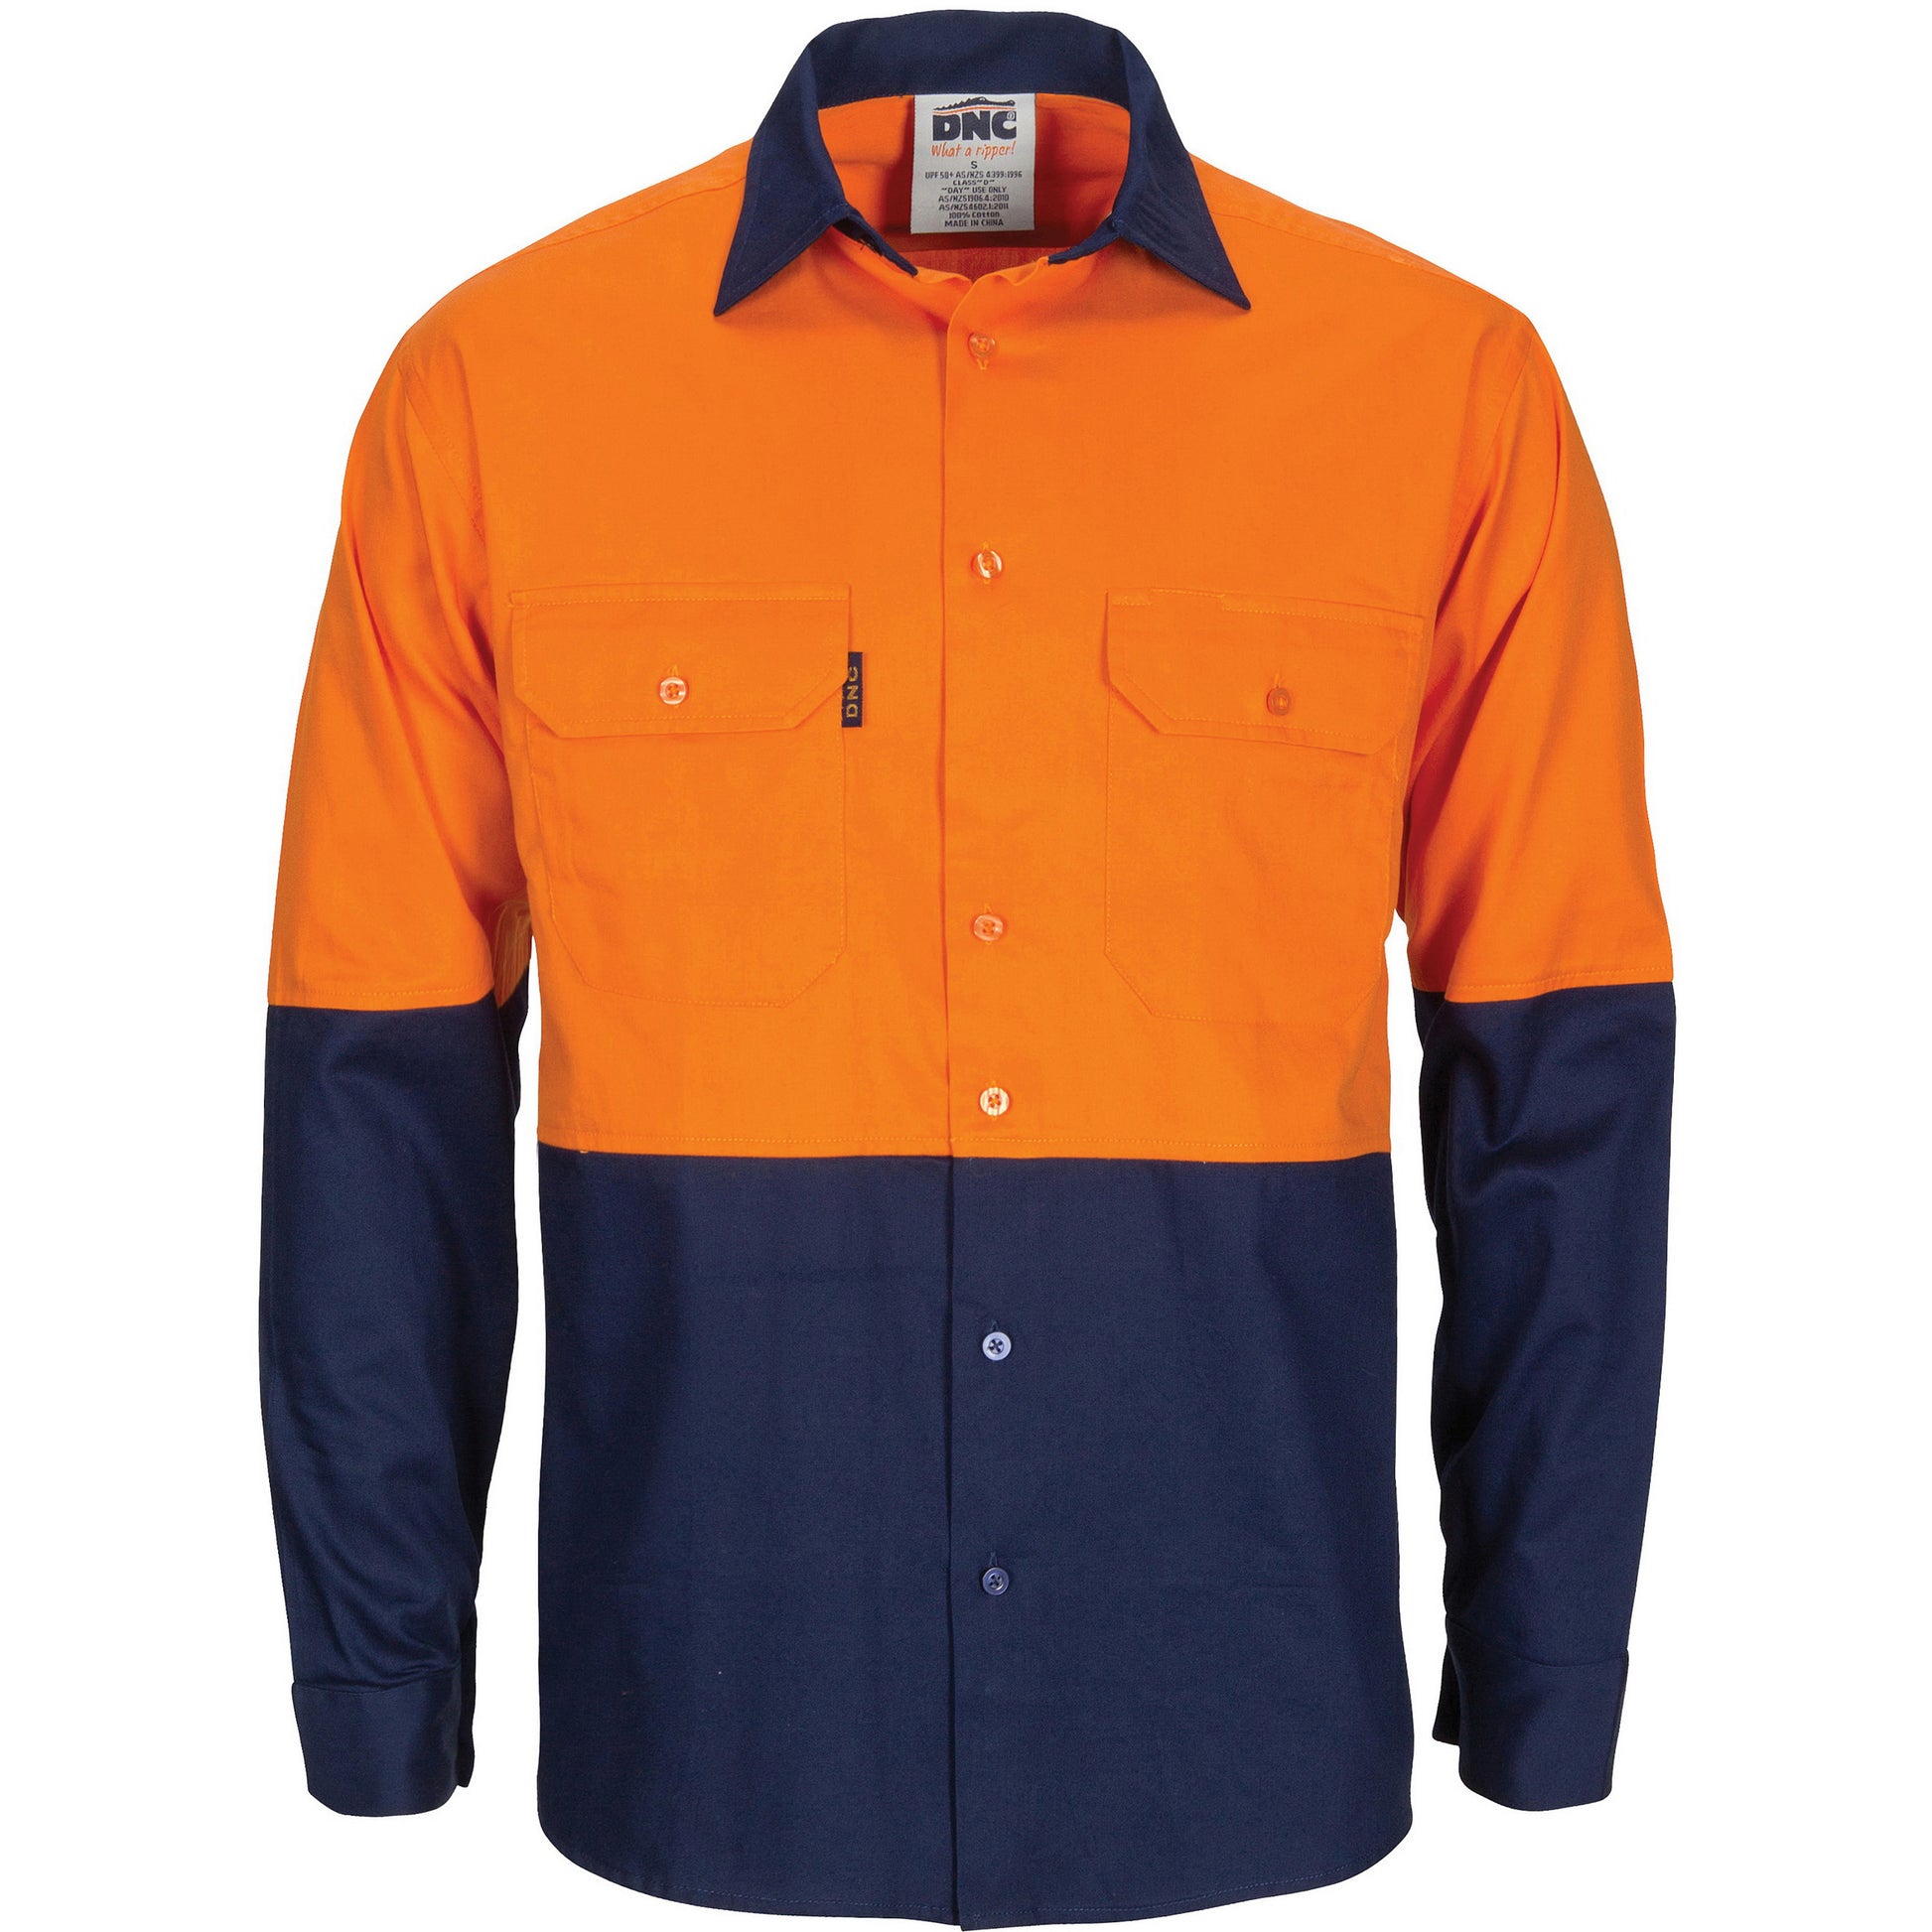 DNC HiVis R/W Cool-Breeze T2 Vertical Vented Cotton Shirt with Gusset Sleeves - Long Sleeve 3781 - Star Uniforms Australia